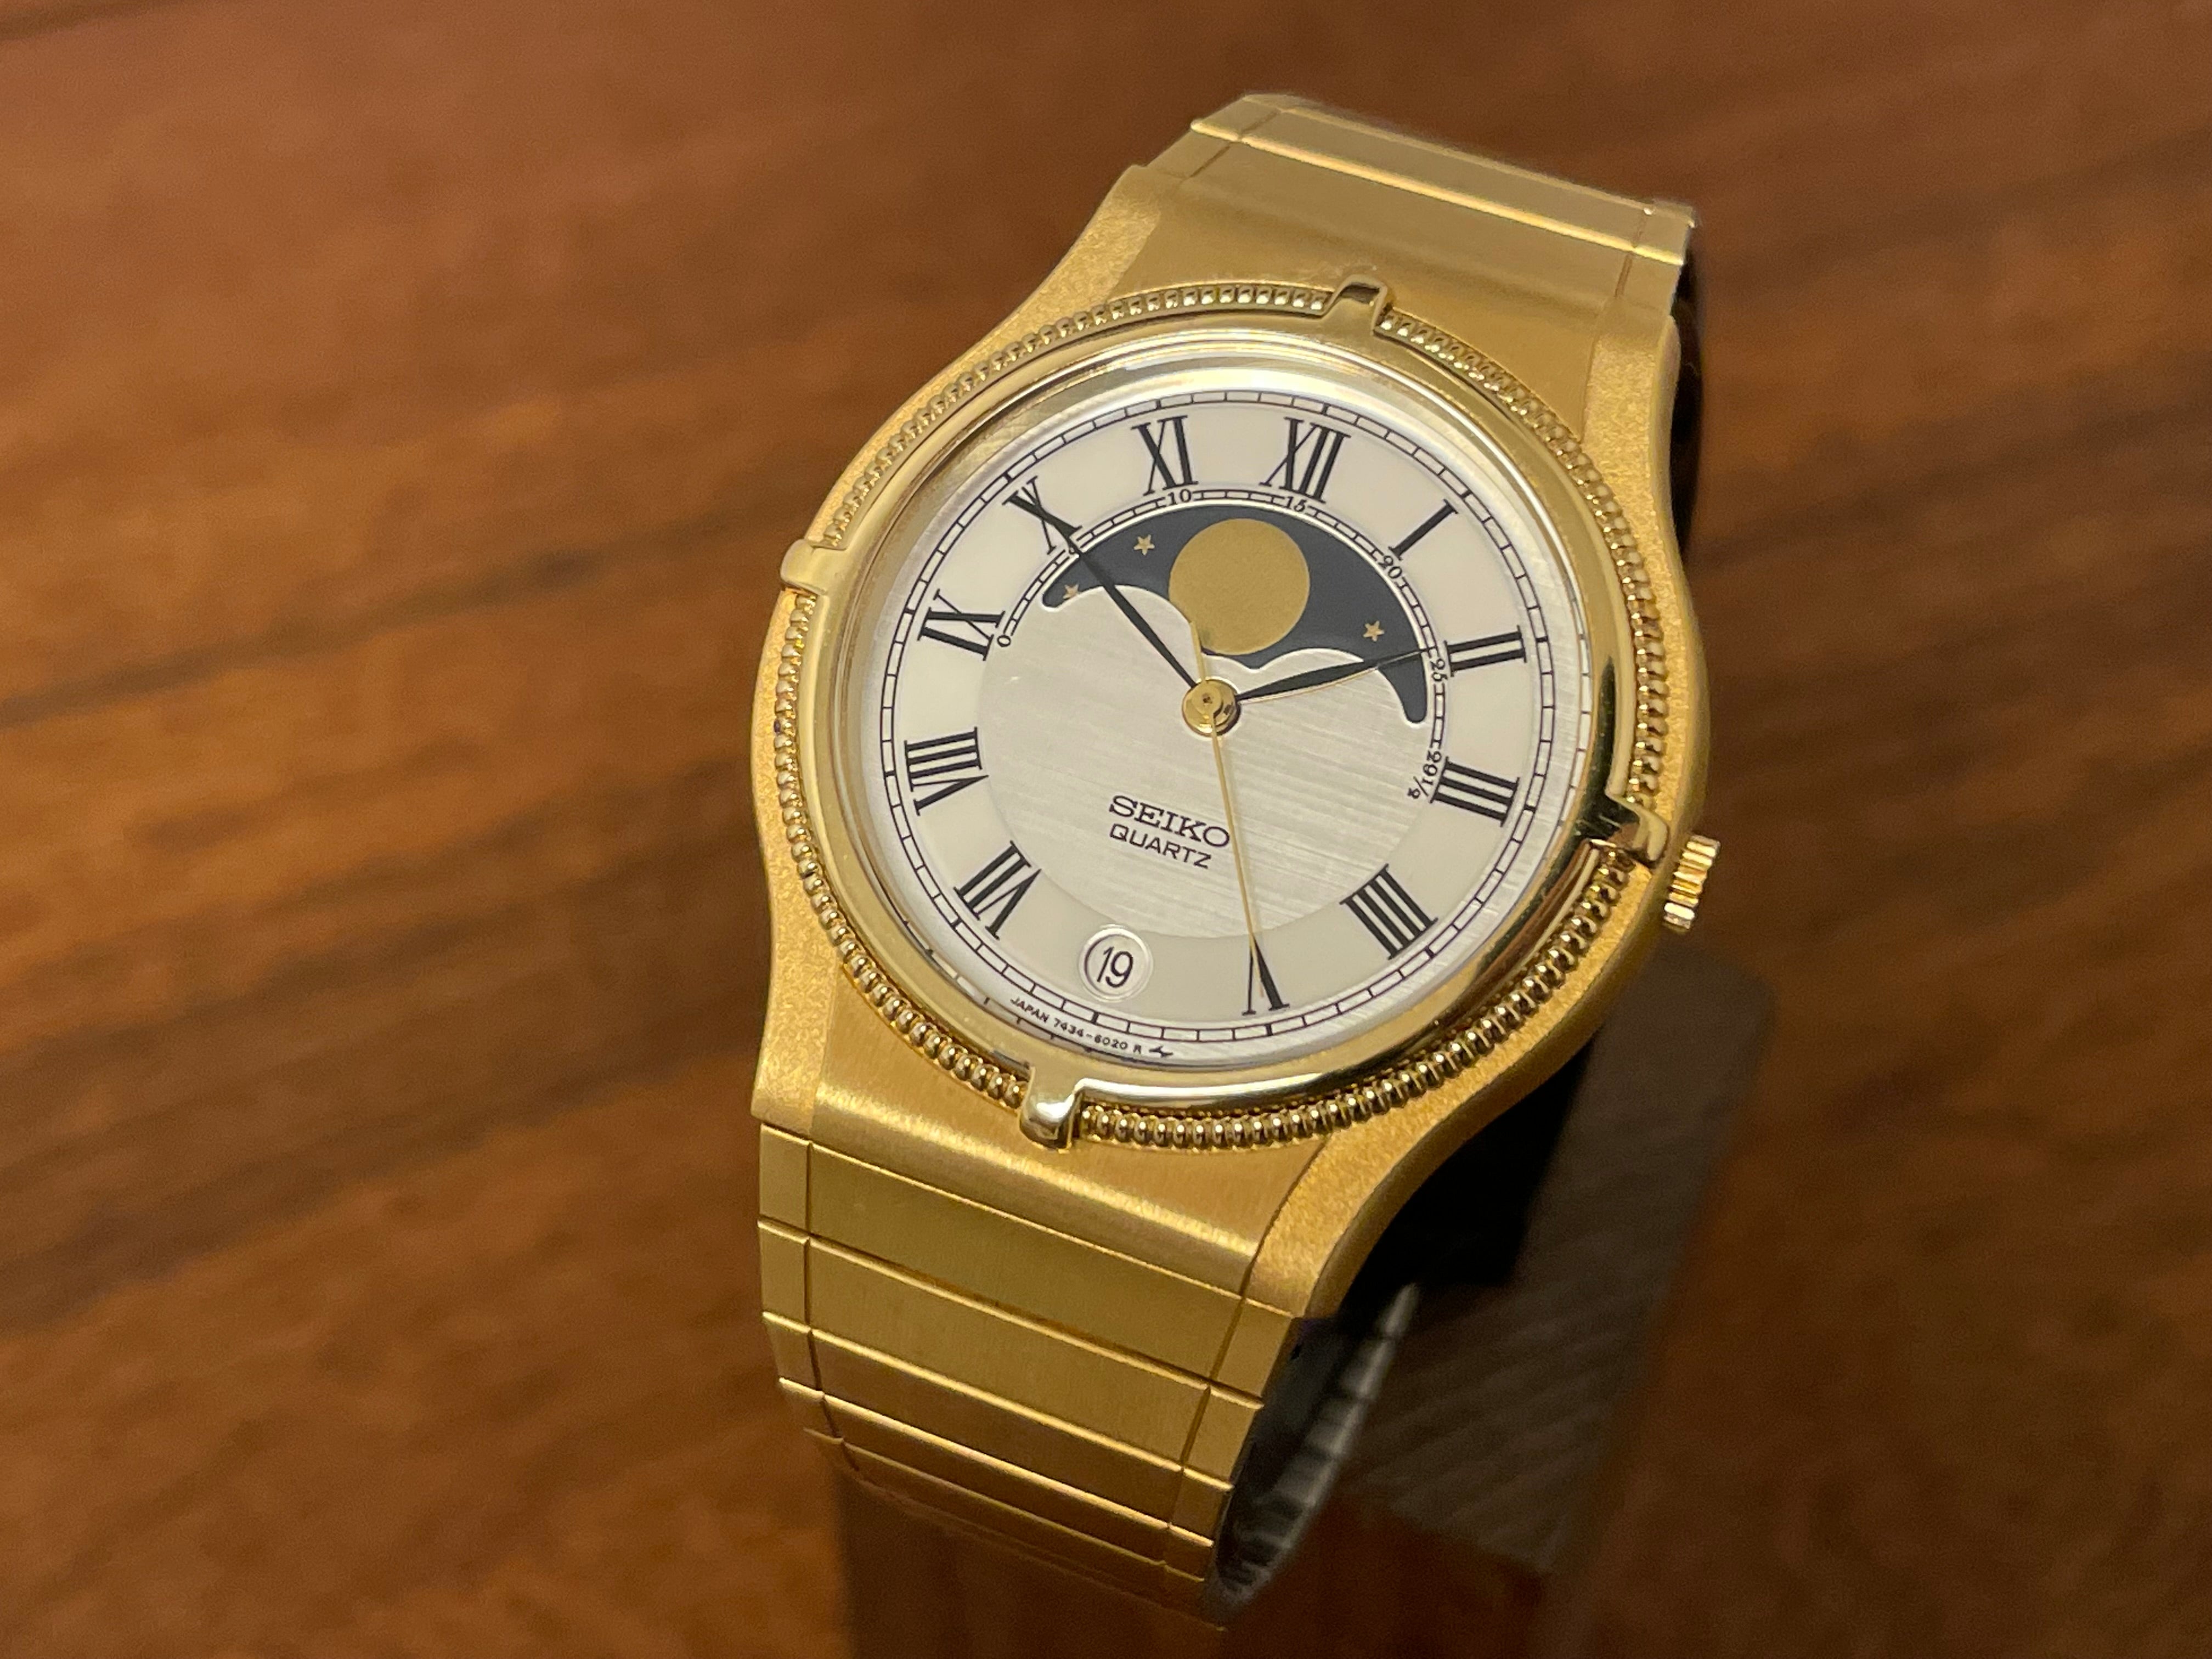 1985) Seiko 7434-6010 gold colored dress watch with moon phase 